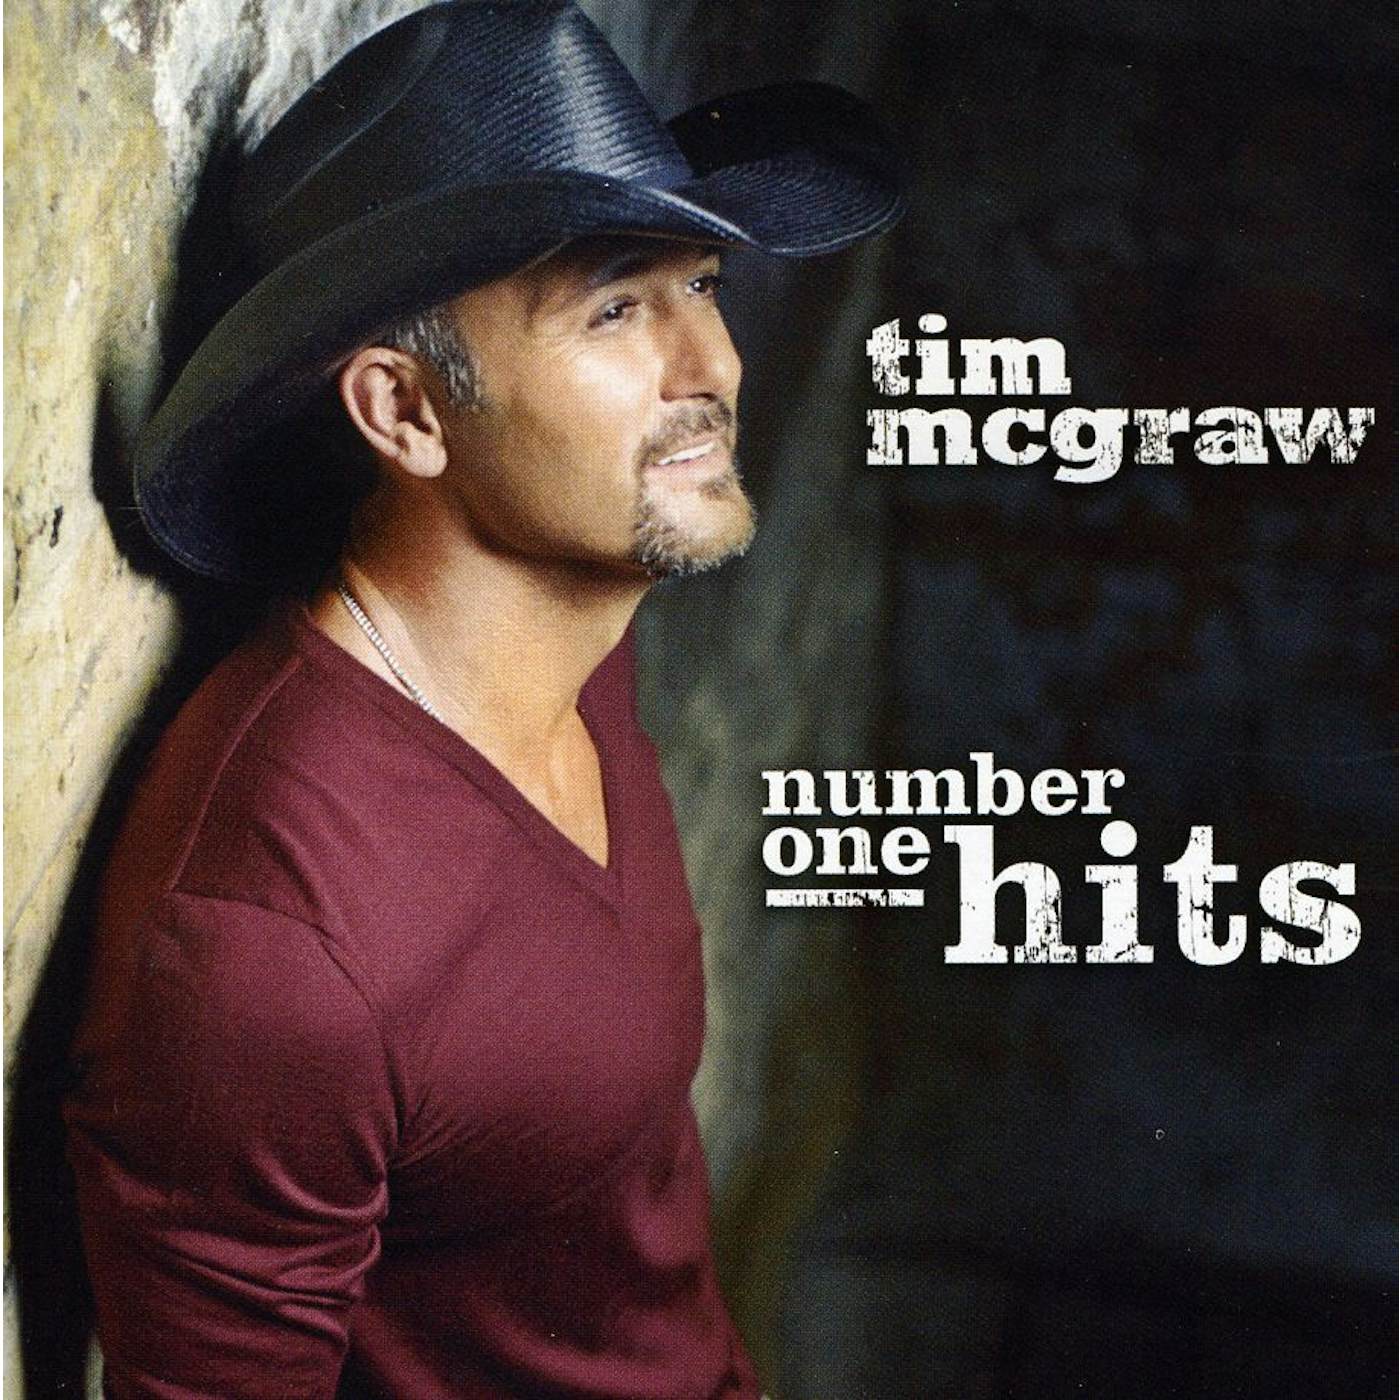 Tim McGraw NUMBER ONE HITS CD